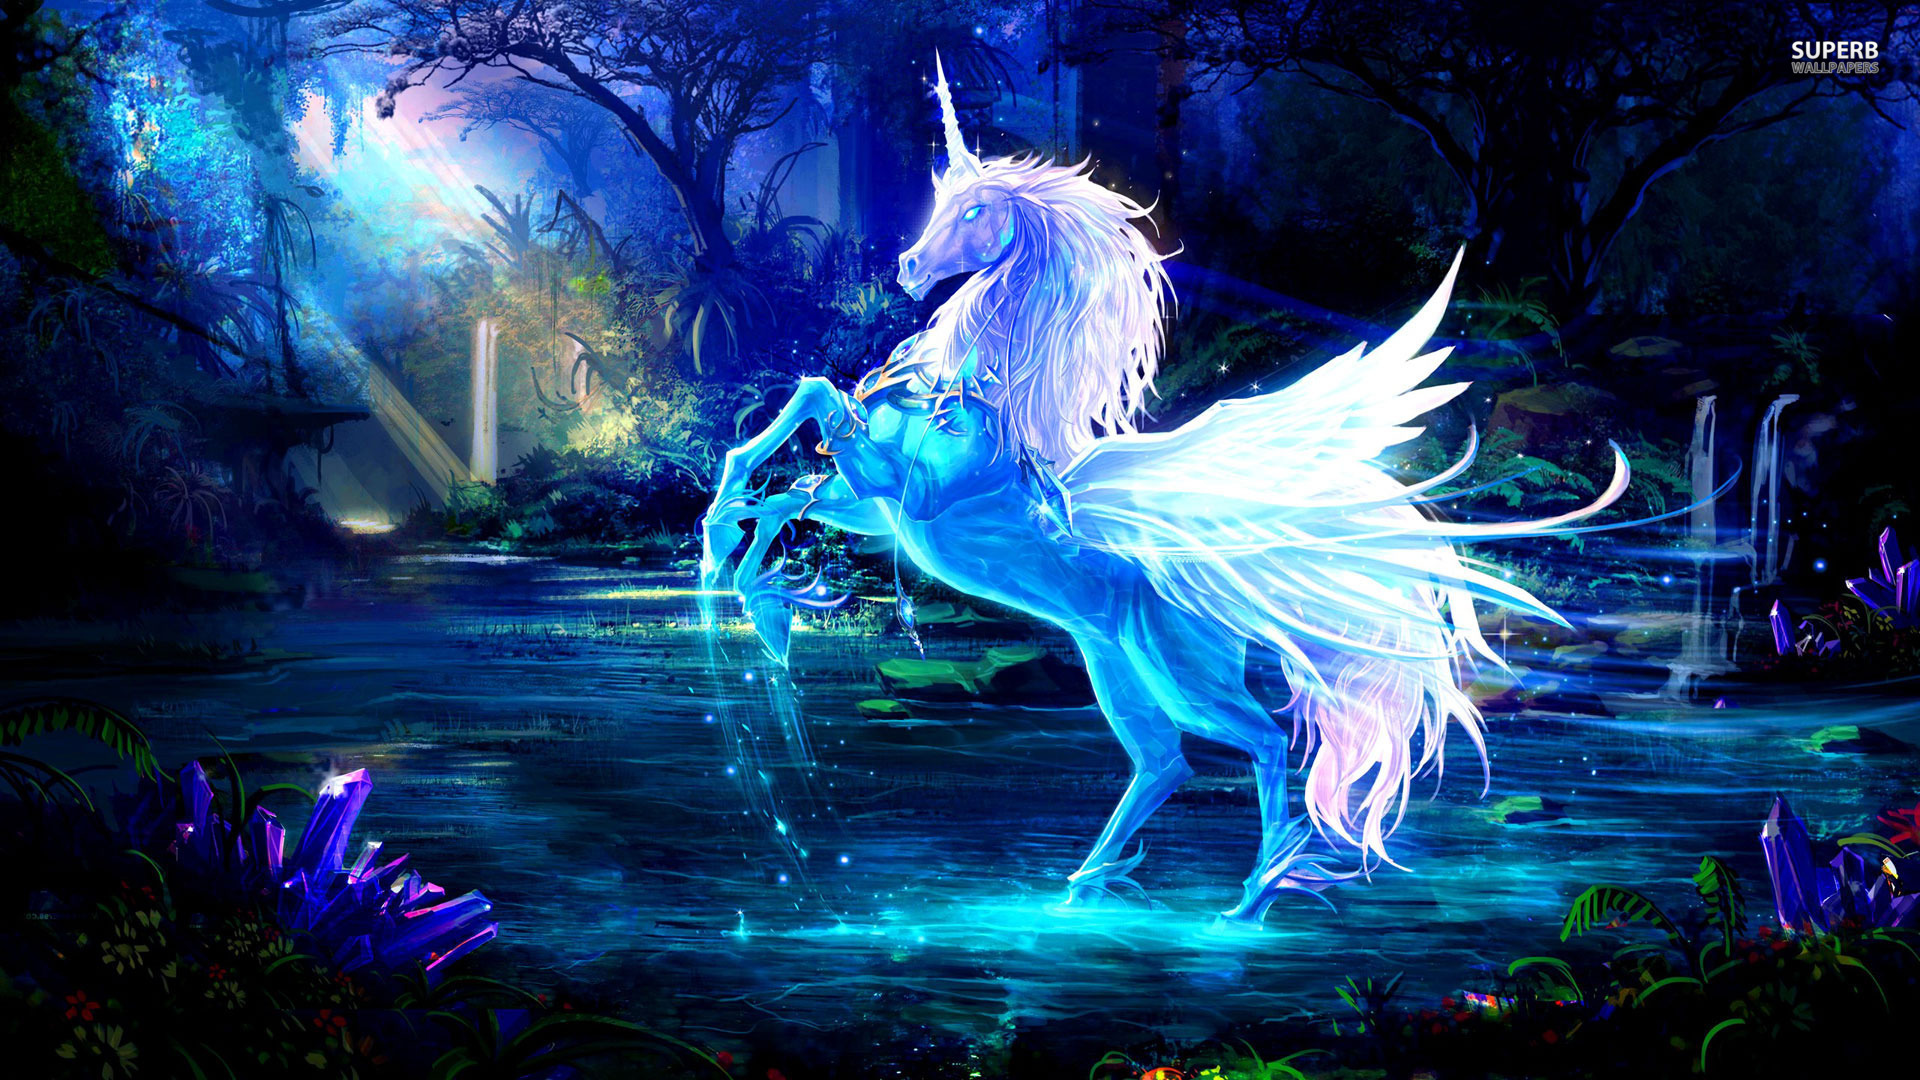 Real Unicorn Wallpaper Images amp Pictures   Becuo 1920x1080